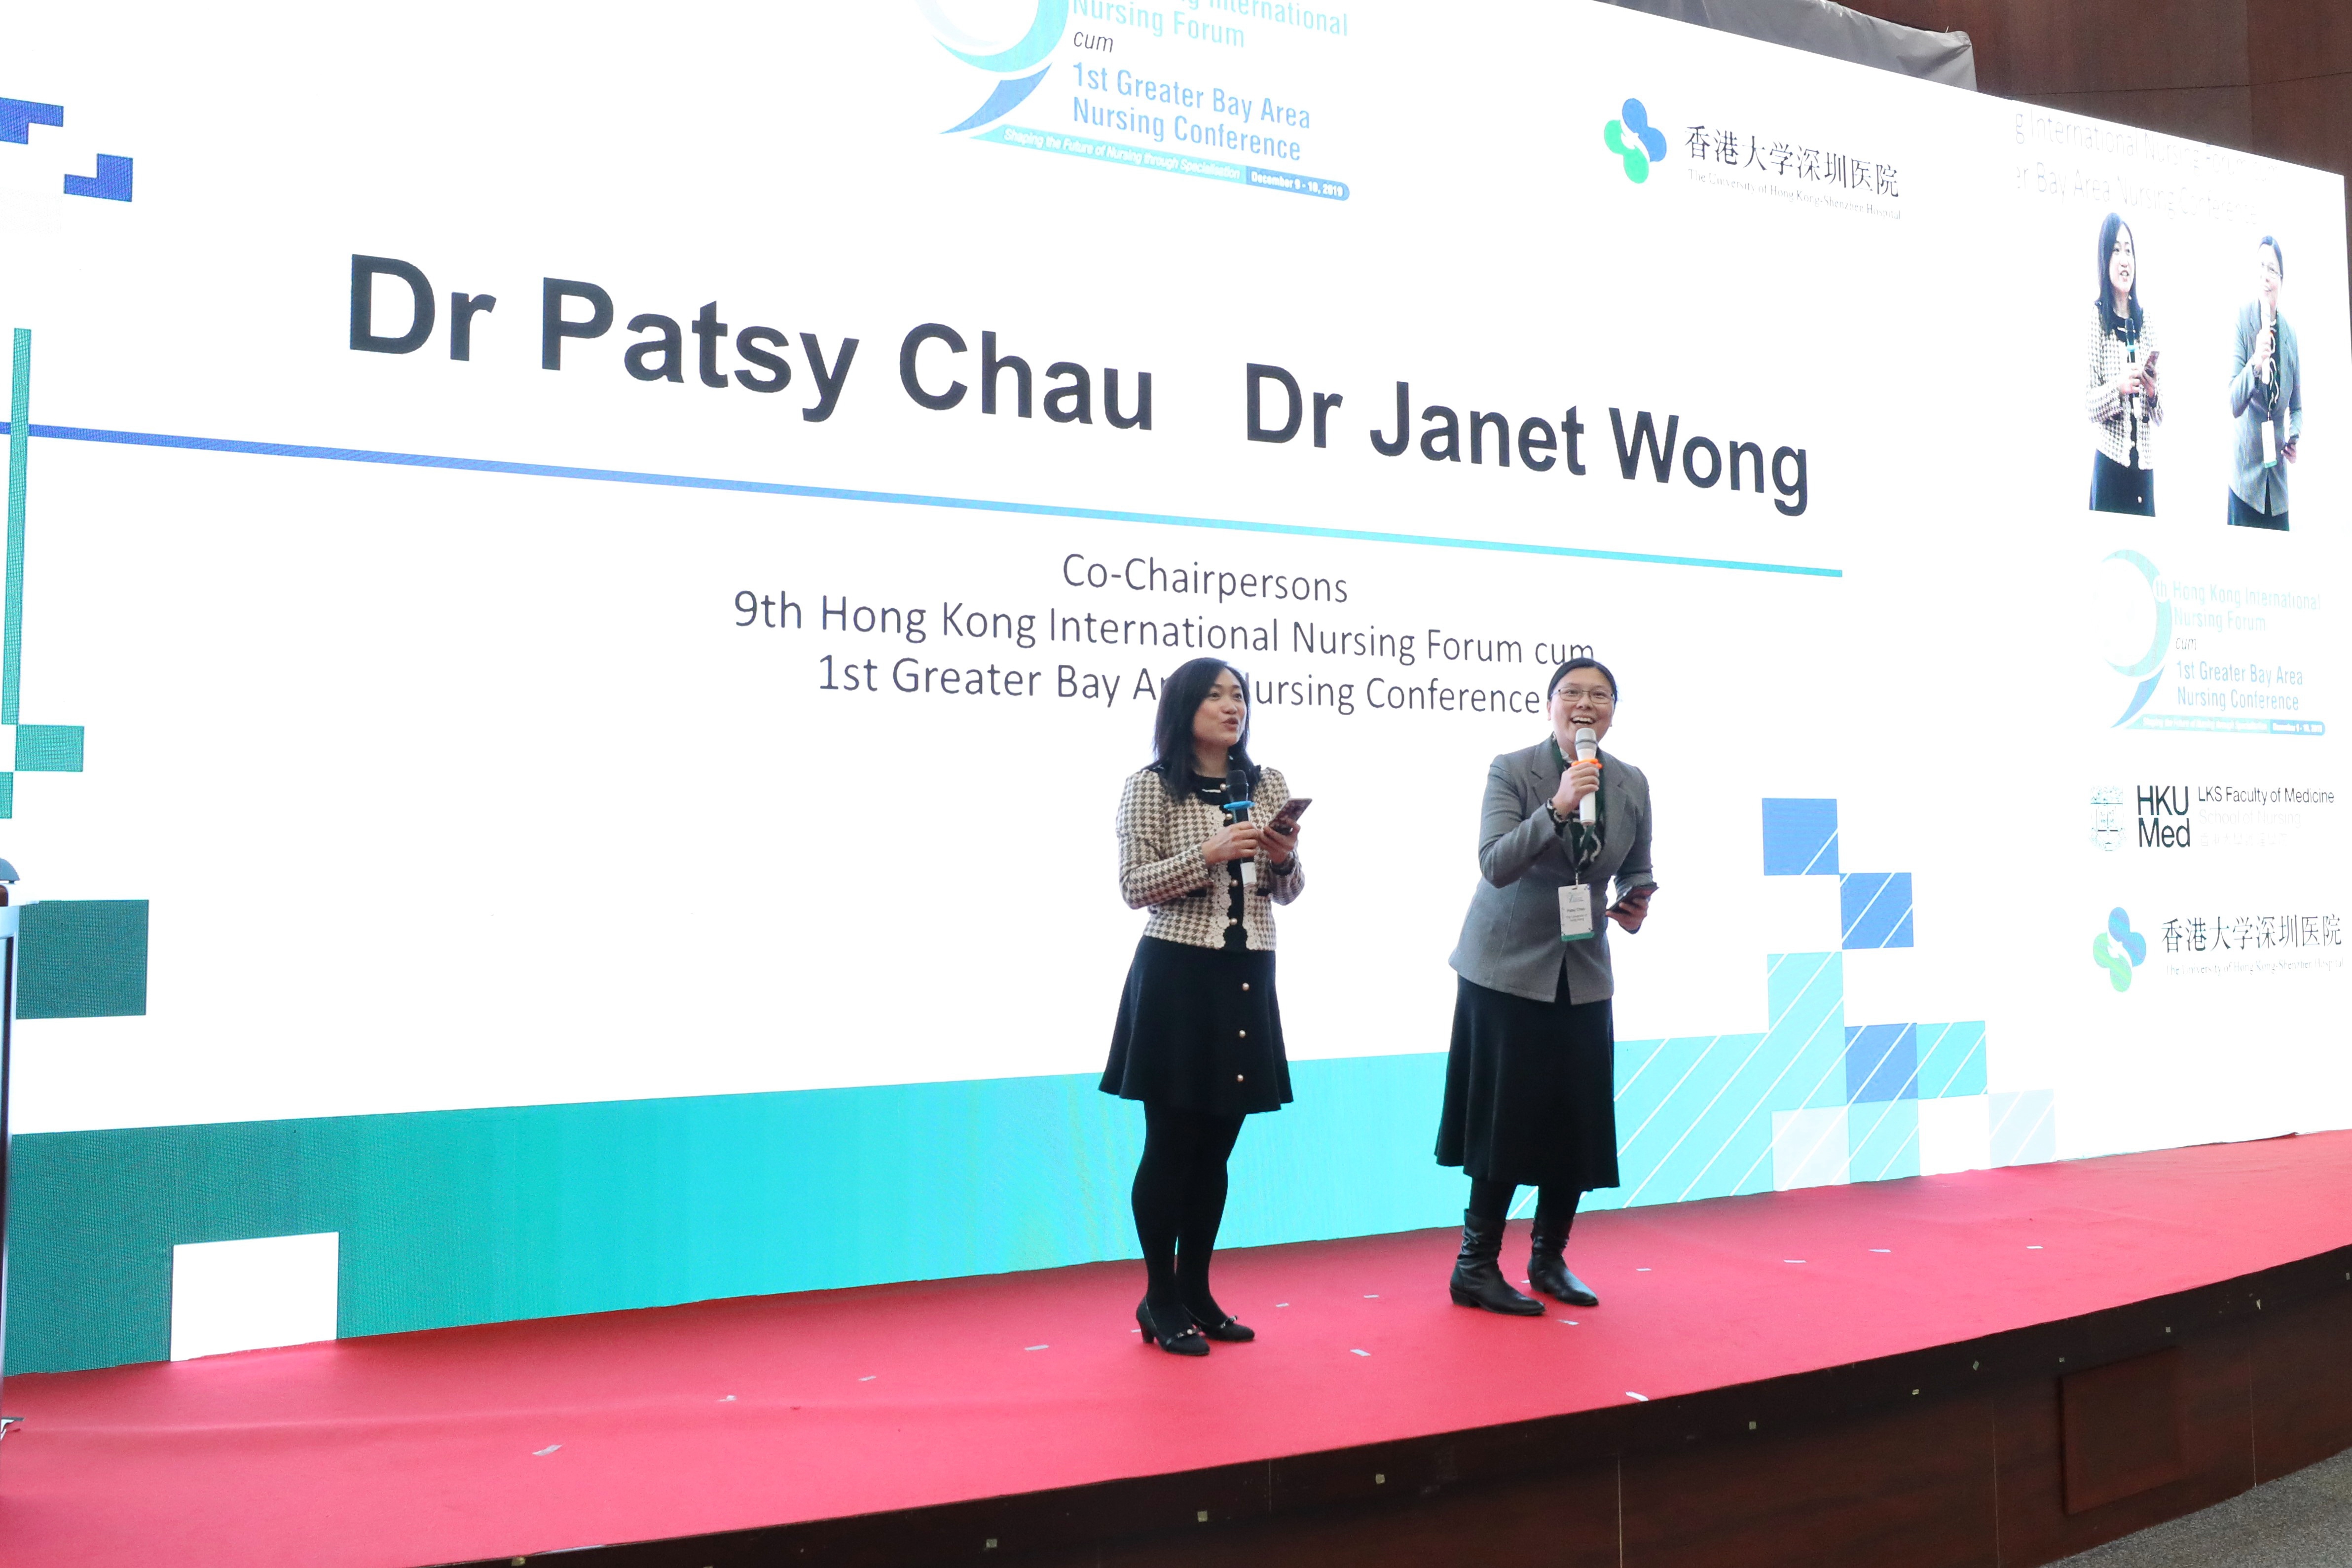 (From Left) Dr Janet Wong and Dr Patsy Chau